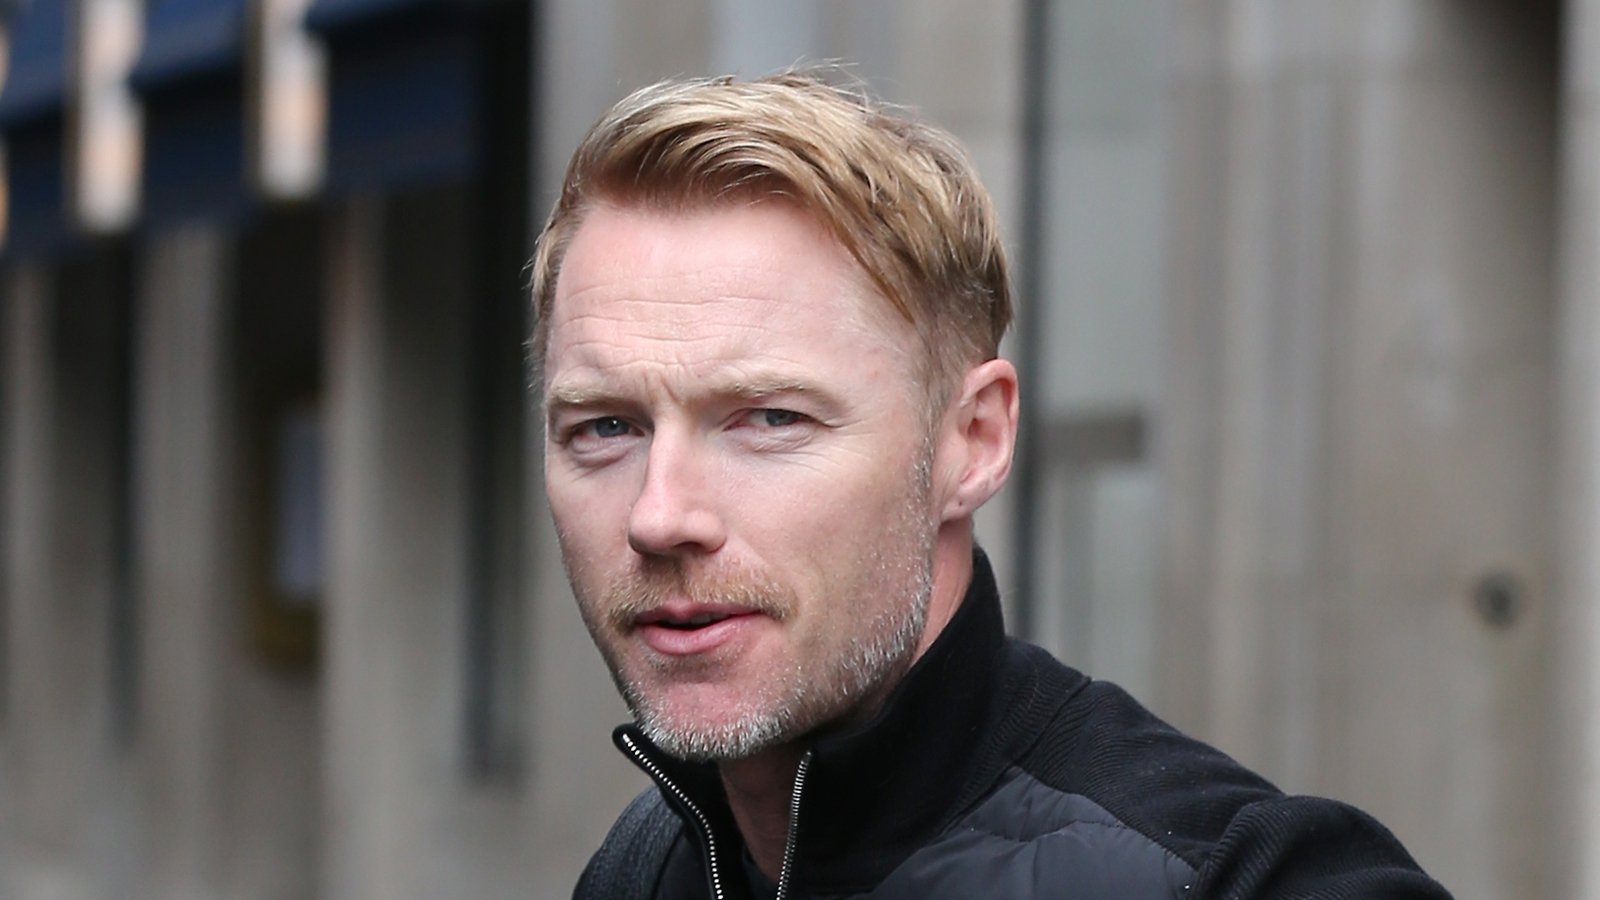 Ronan Keating to cover U2 song on his new album : r/ireland